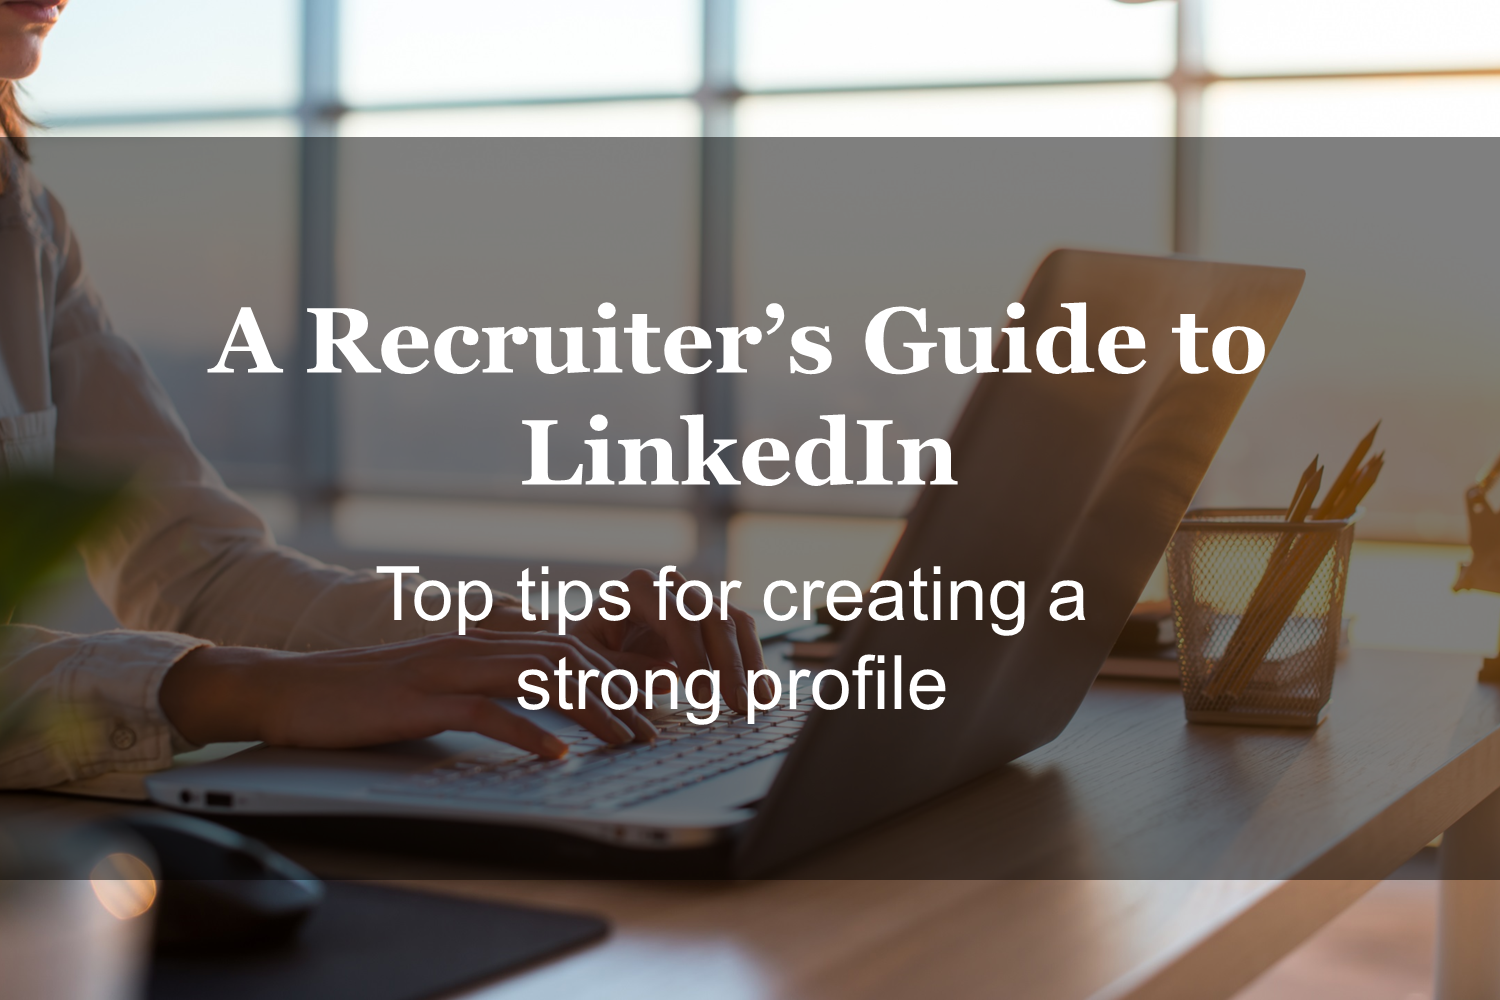 A Recruiter's Guide to LinkedIn